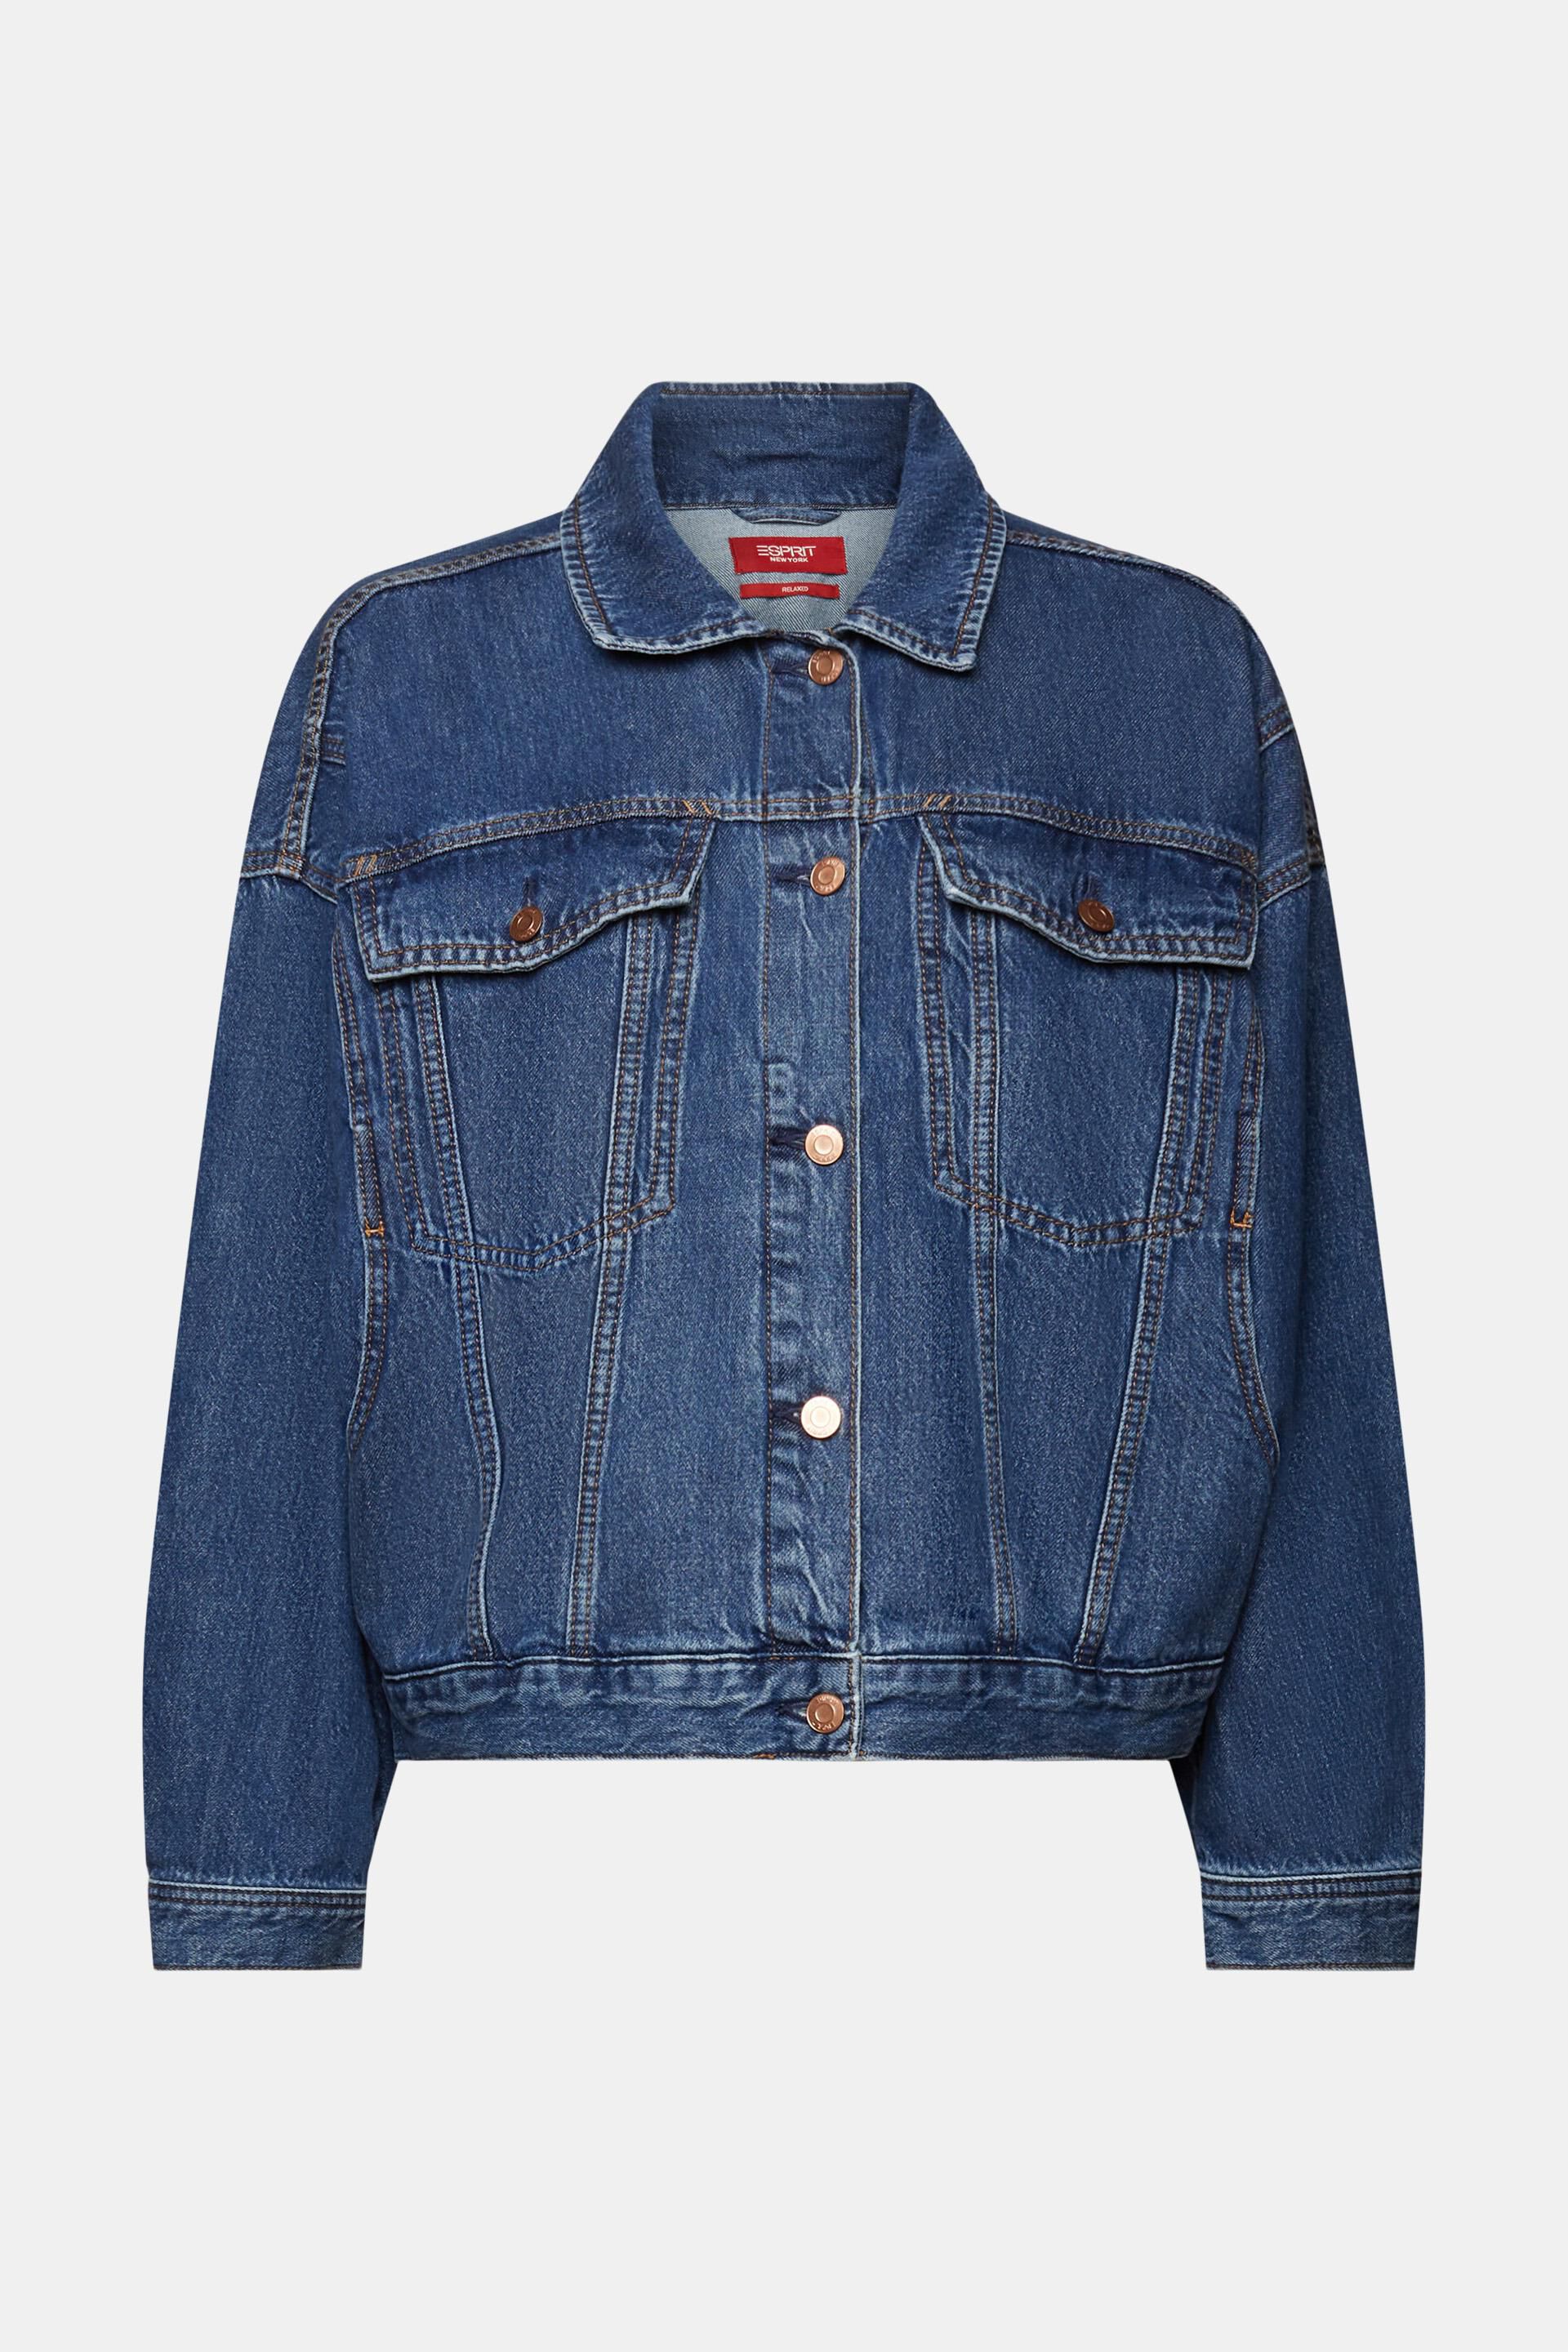 Close the Loop: H&M Uses Recycled Denim for New Collection - Wardrobe  Trends Fashion (WTF)